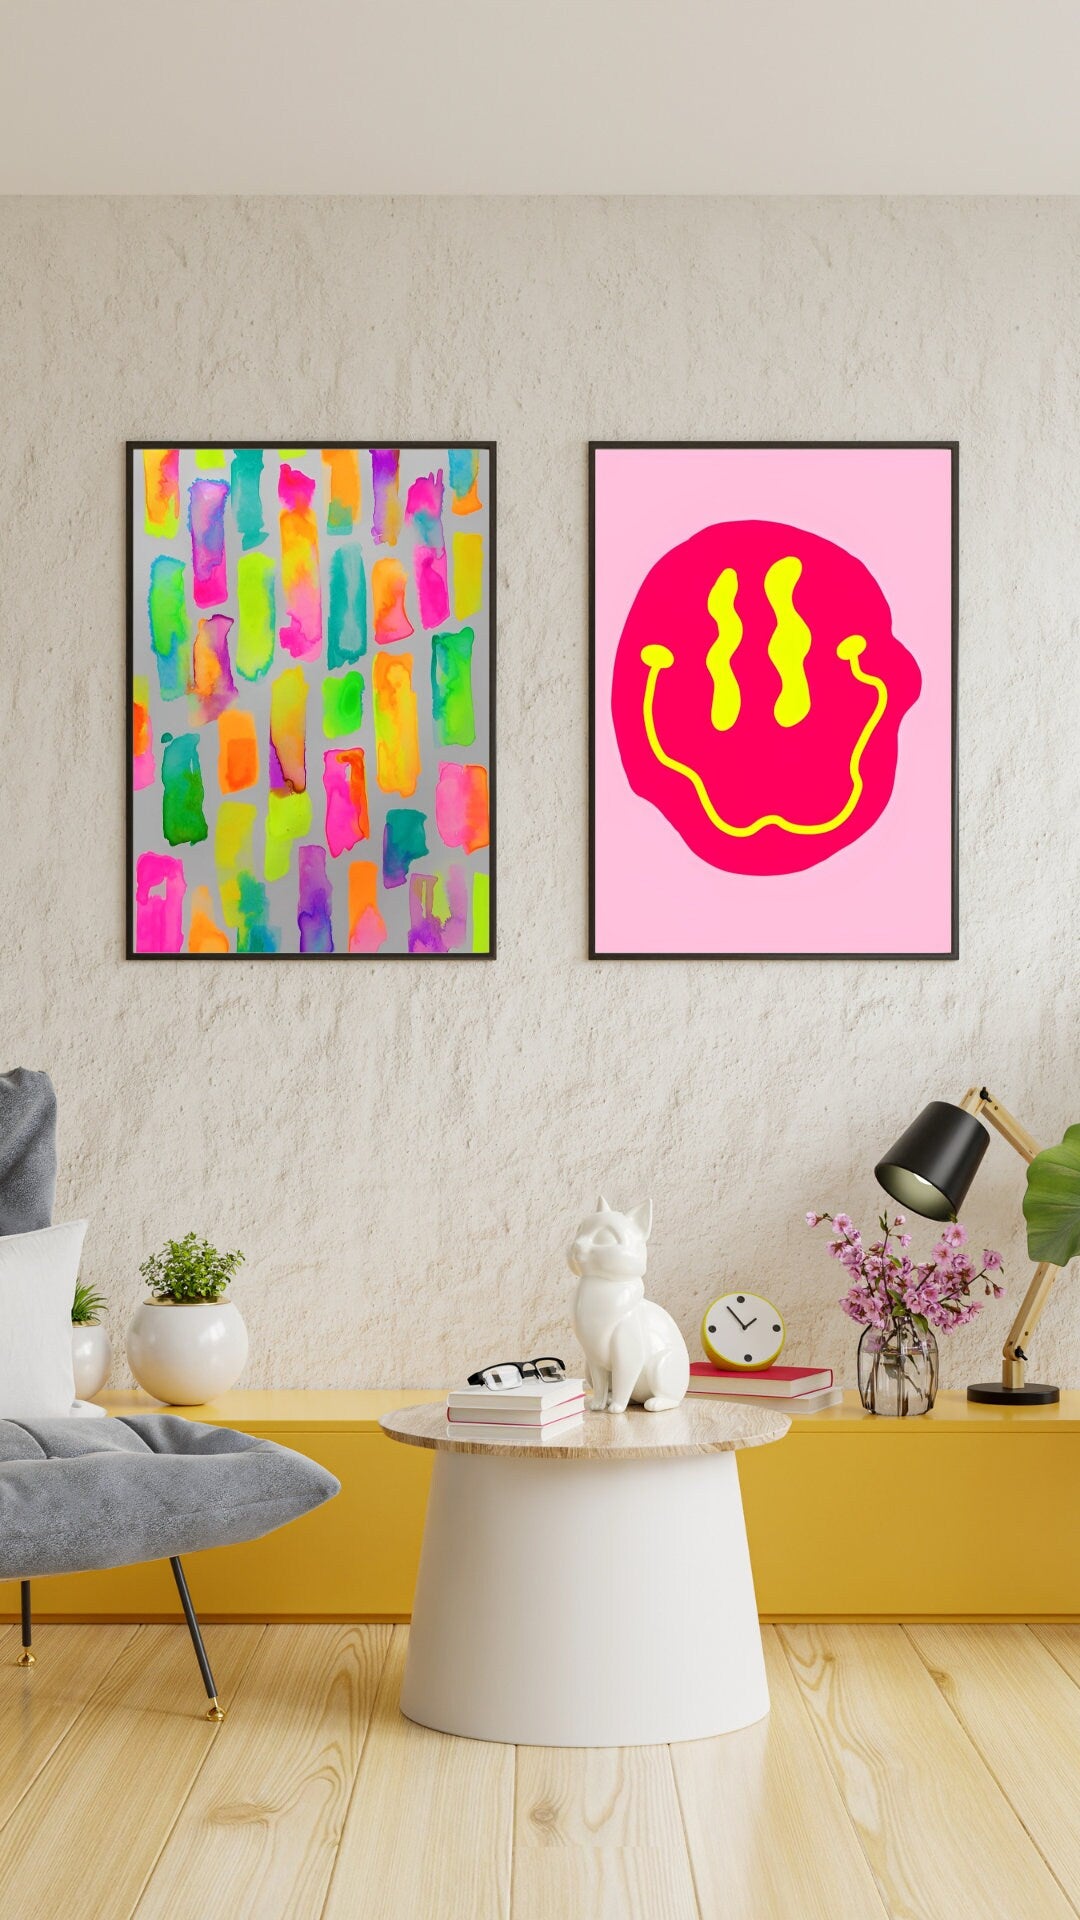 Eclectic Gallery Set of 9 DIGITAL PRINTS, Trendy Art Prints, Exhibition Wall Art, Colorful street art posters, Funky wall art, Abstract art